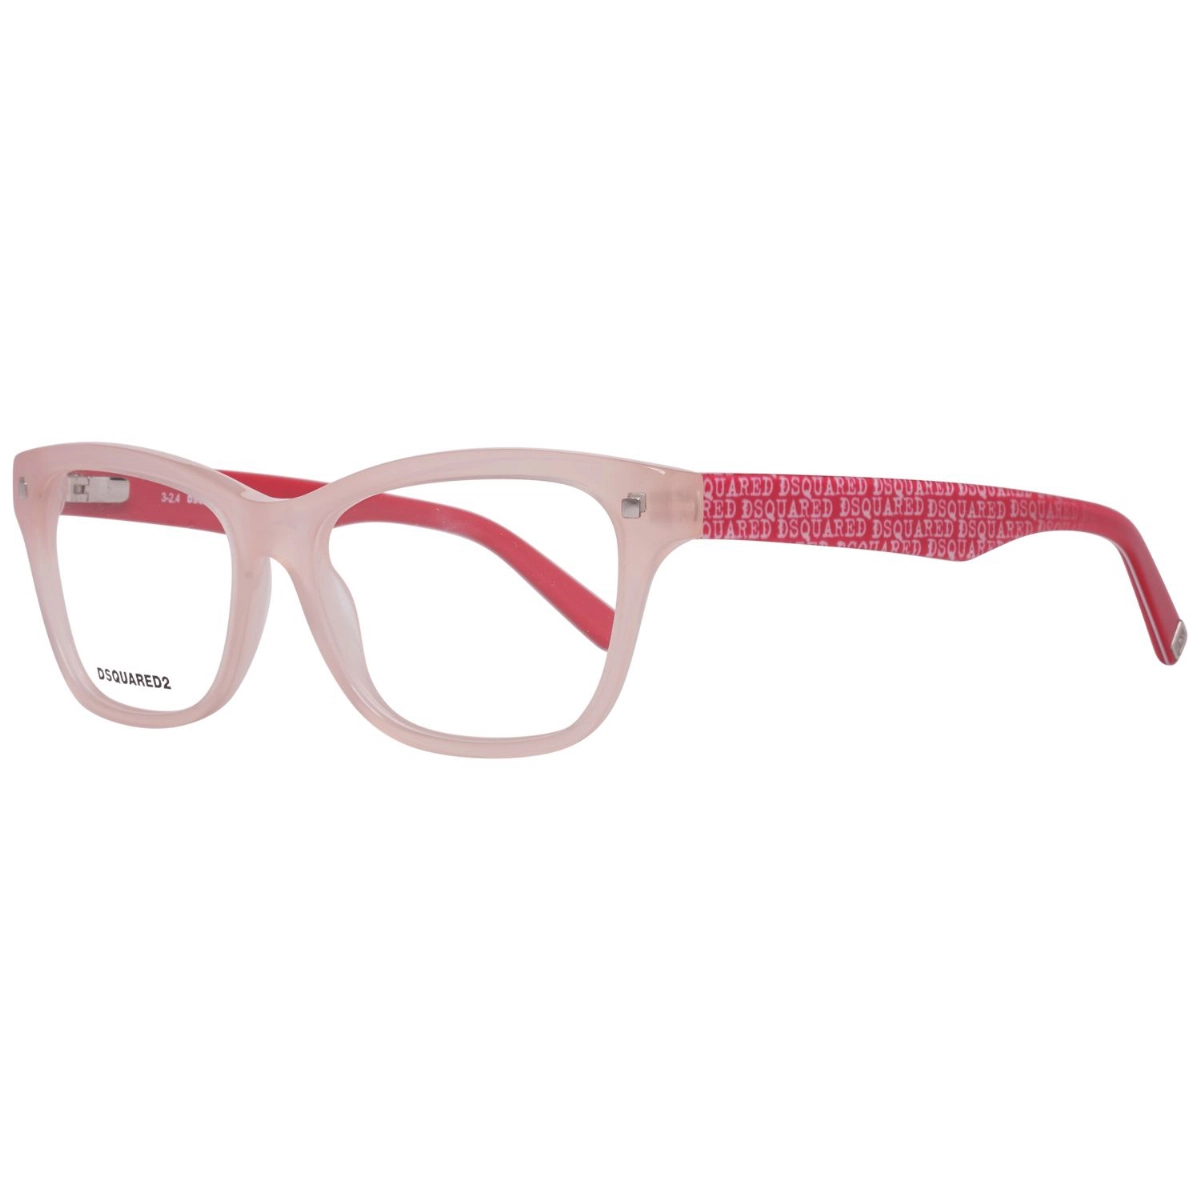 GLASSES FOR WOMAN DSQUARED2 DQ5138-072-53